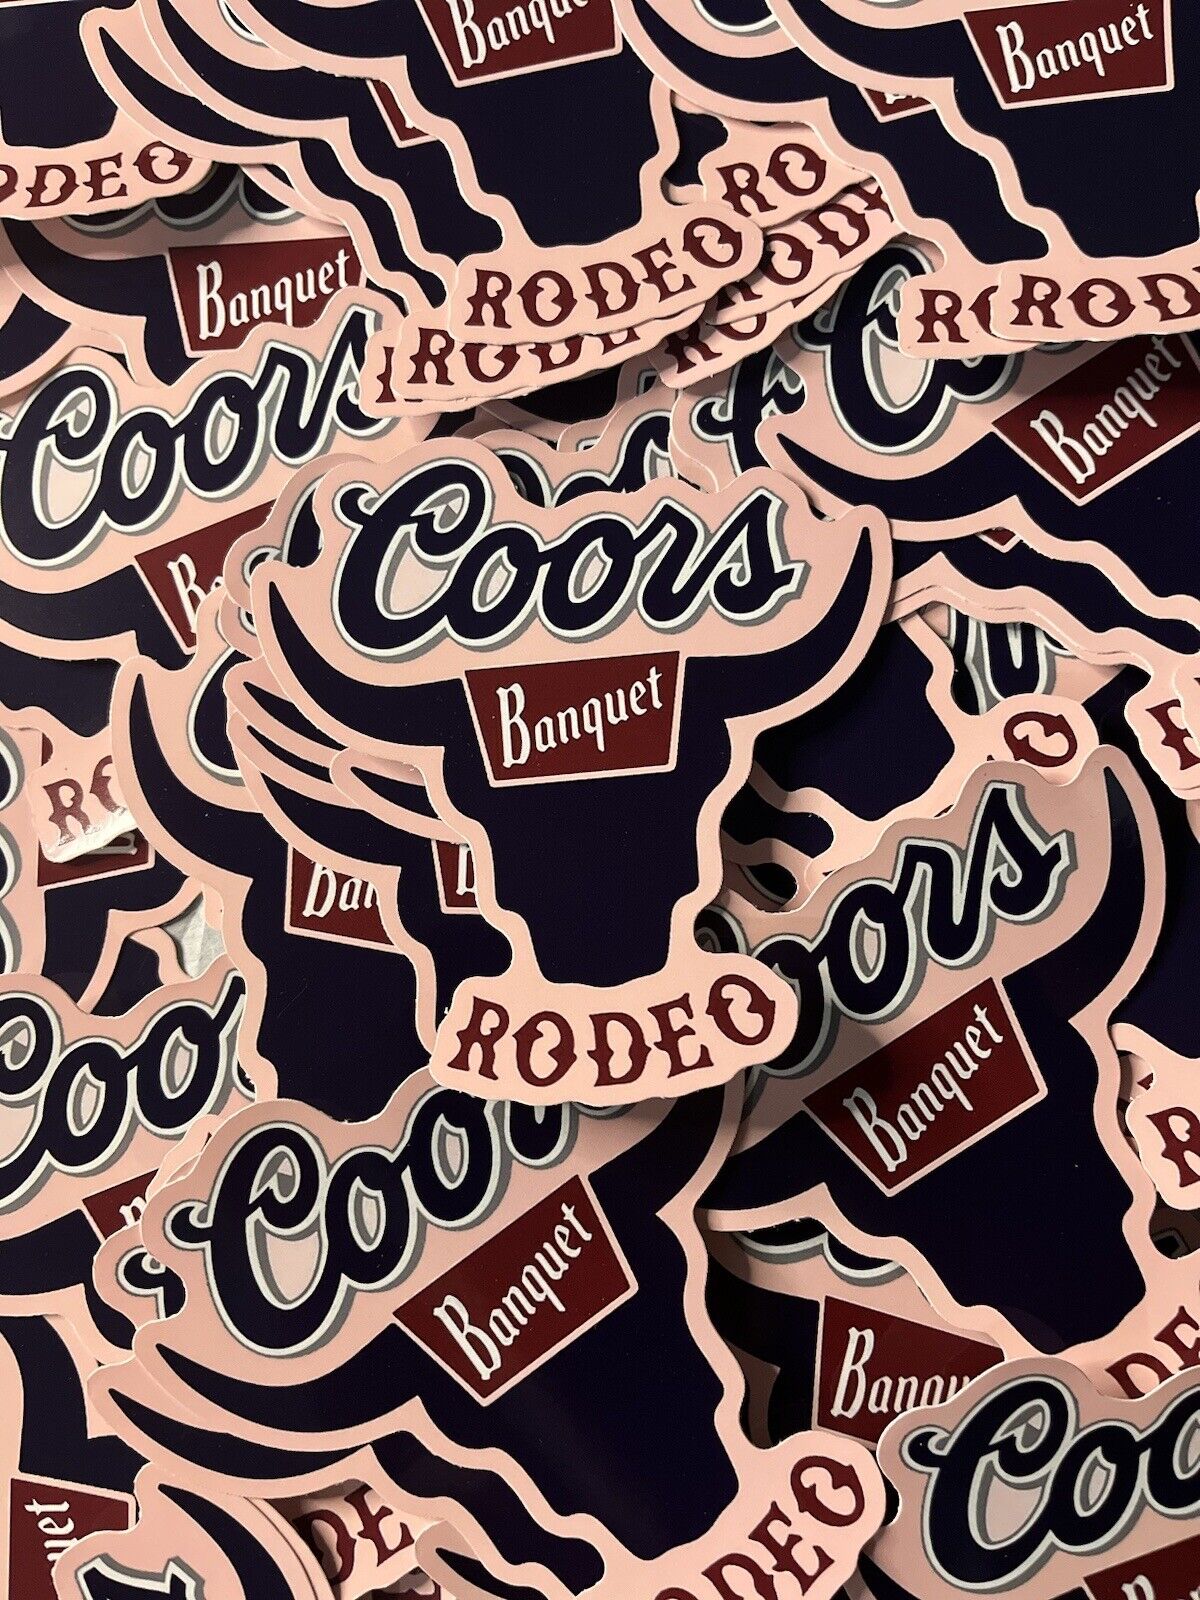 coors banquet Rodeo Cow print Sticker Pink Background